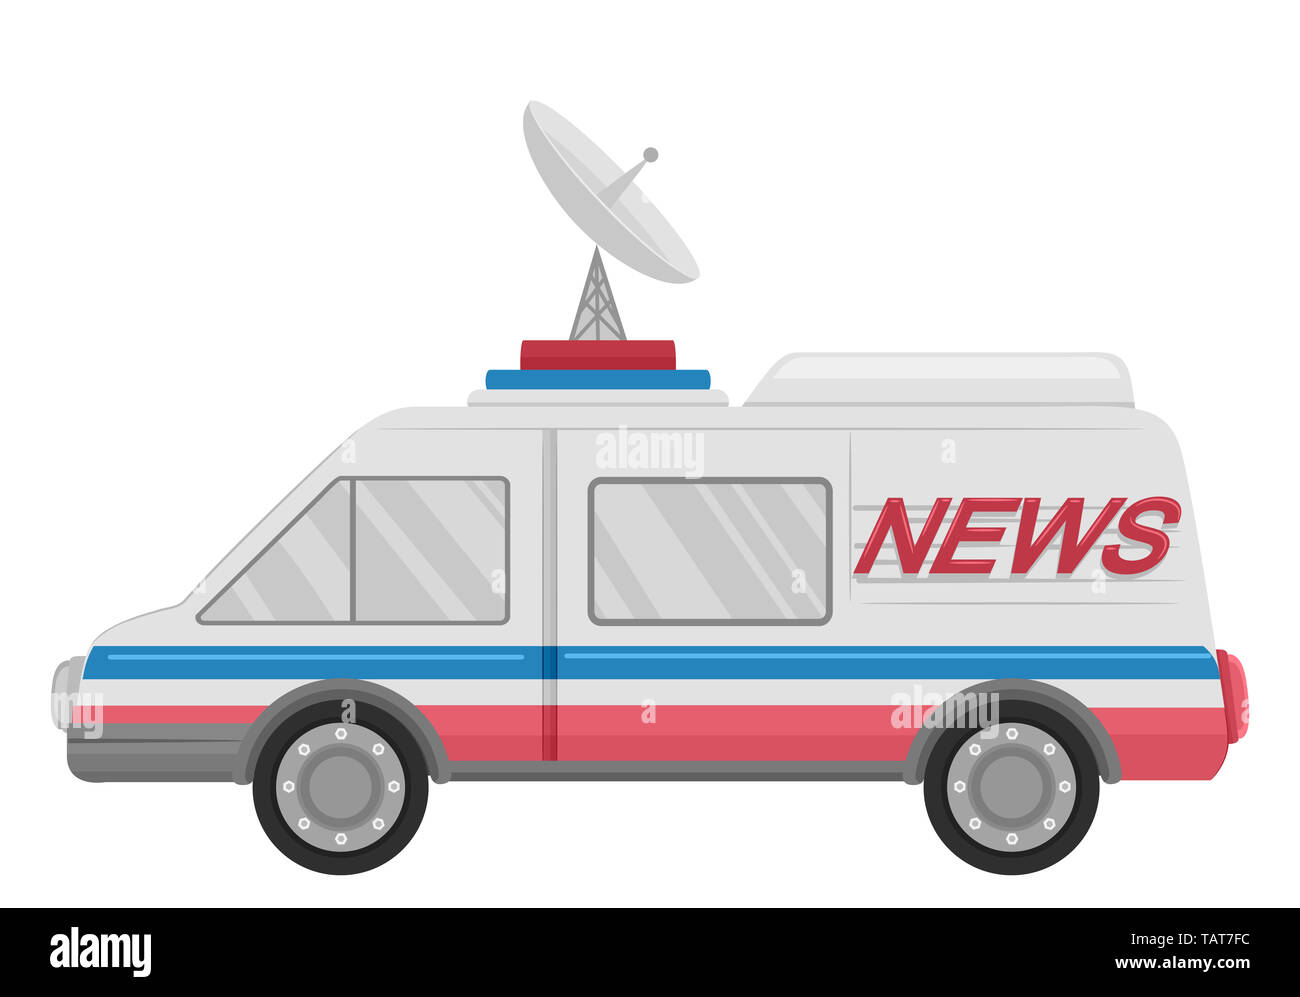 Illustration of a News Van Car with Satellite Dish on Top Stock Photo